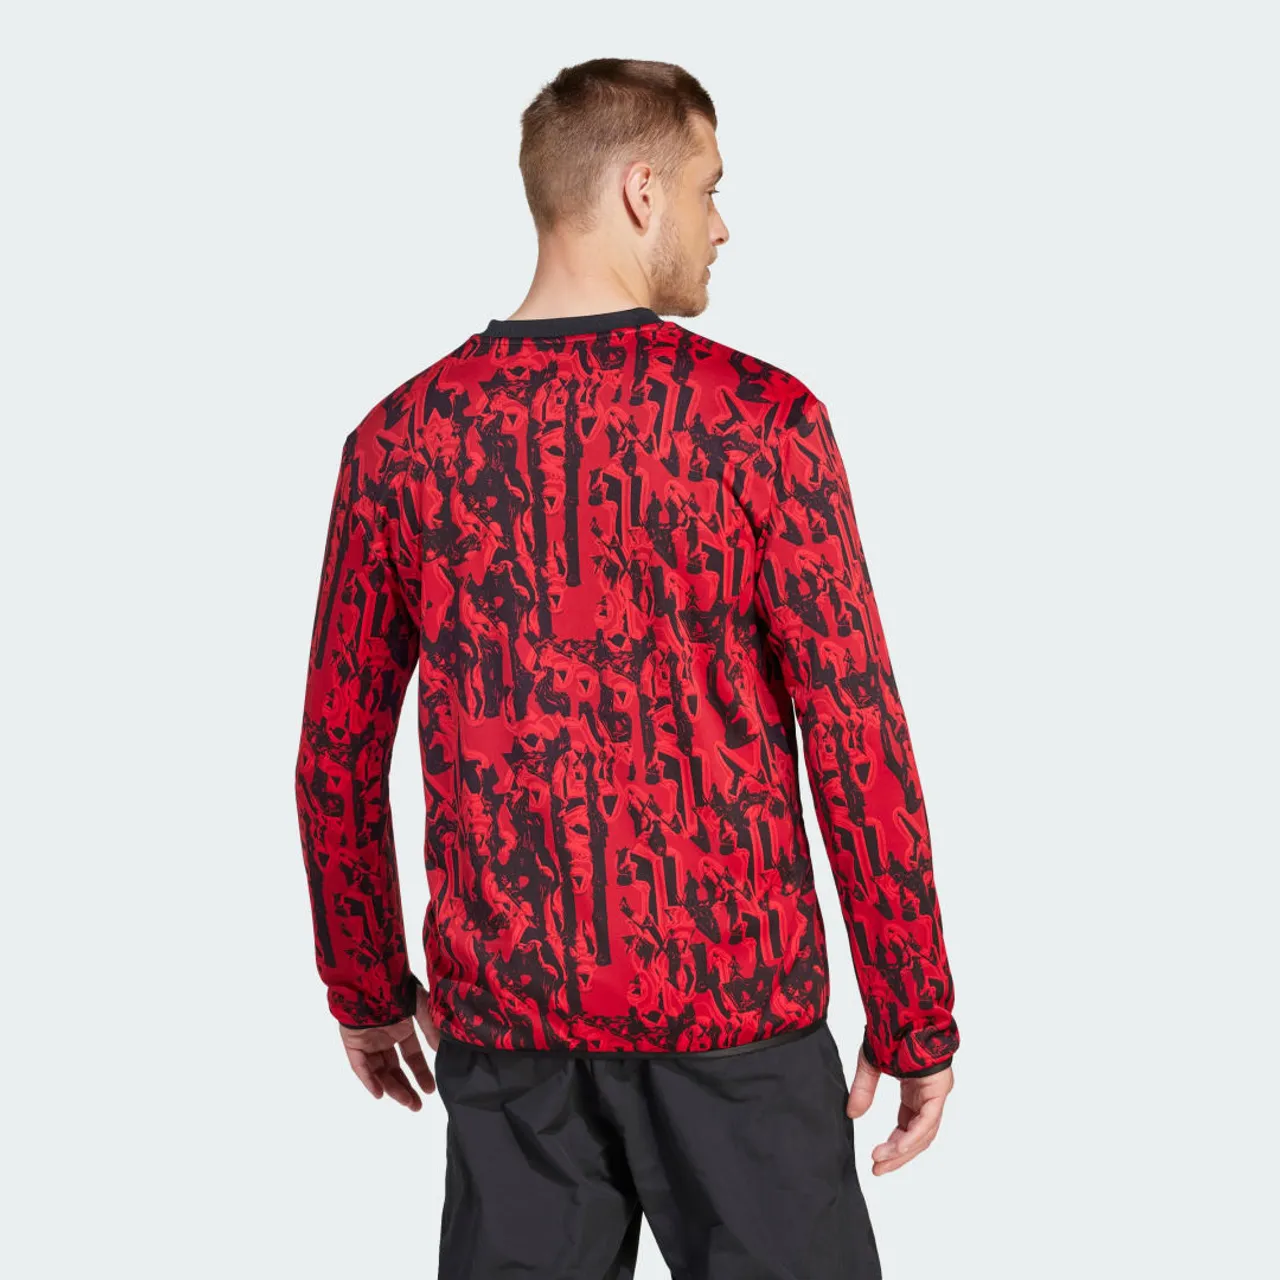 Manchester United Pre-Match Warm Top